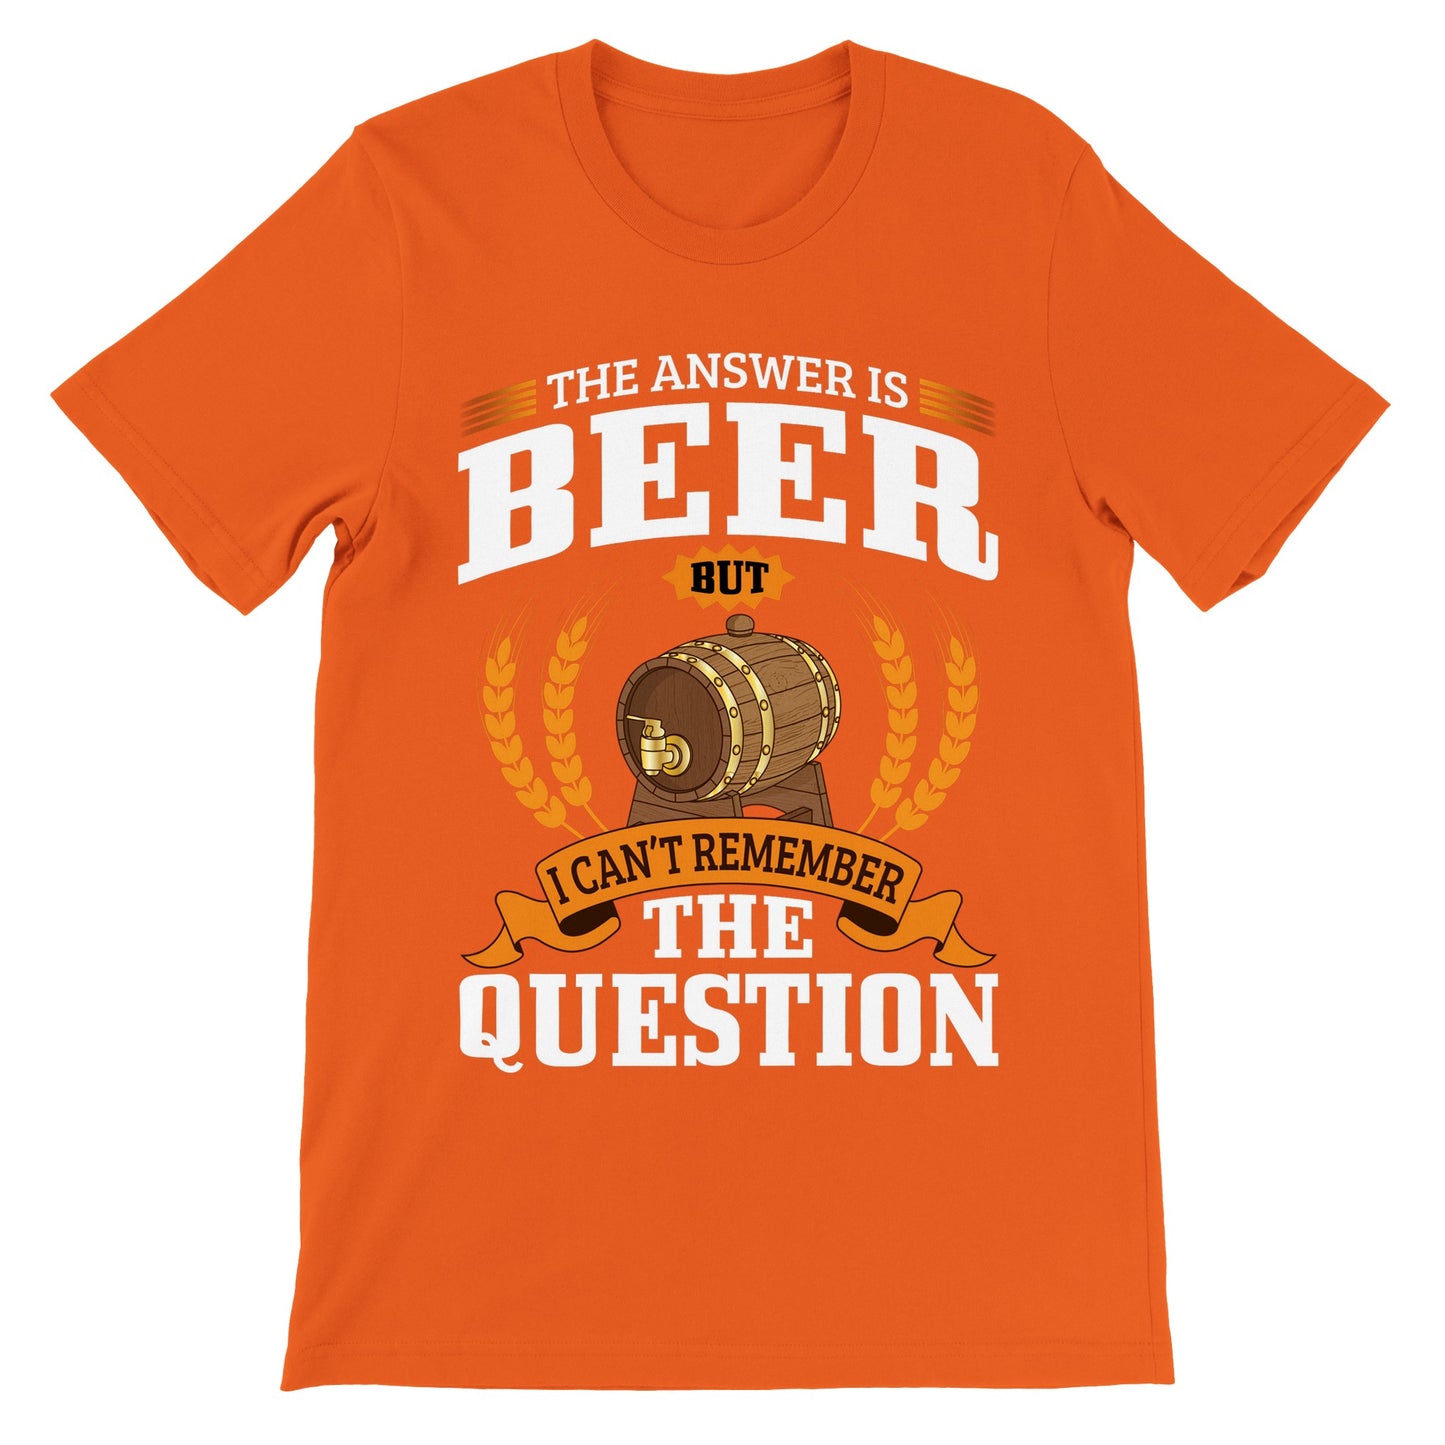 Lustige T-Shirts – The Answer is Beer But – Premium Unisex T-Shirt 